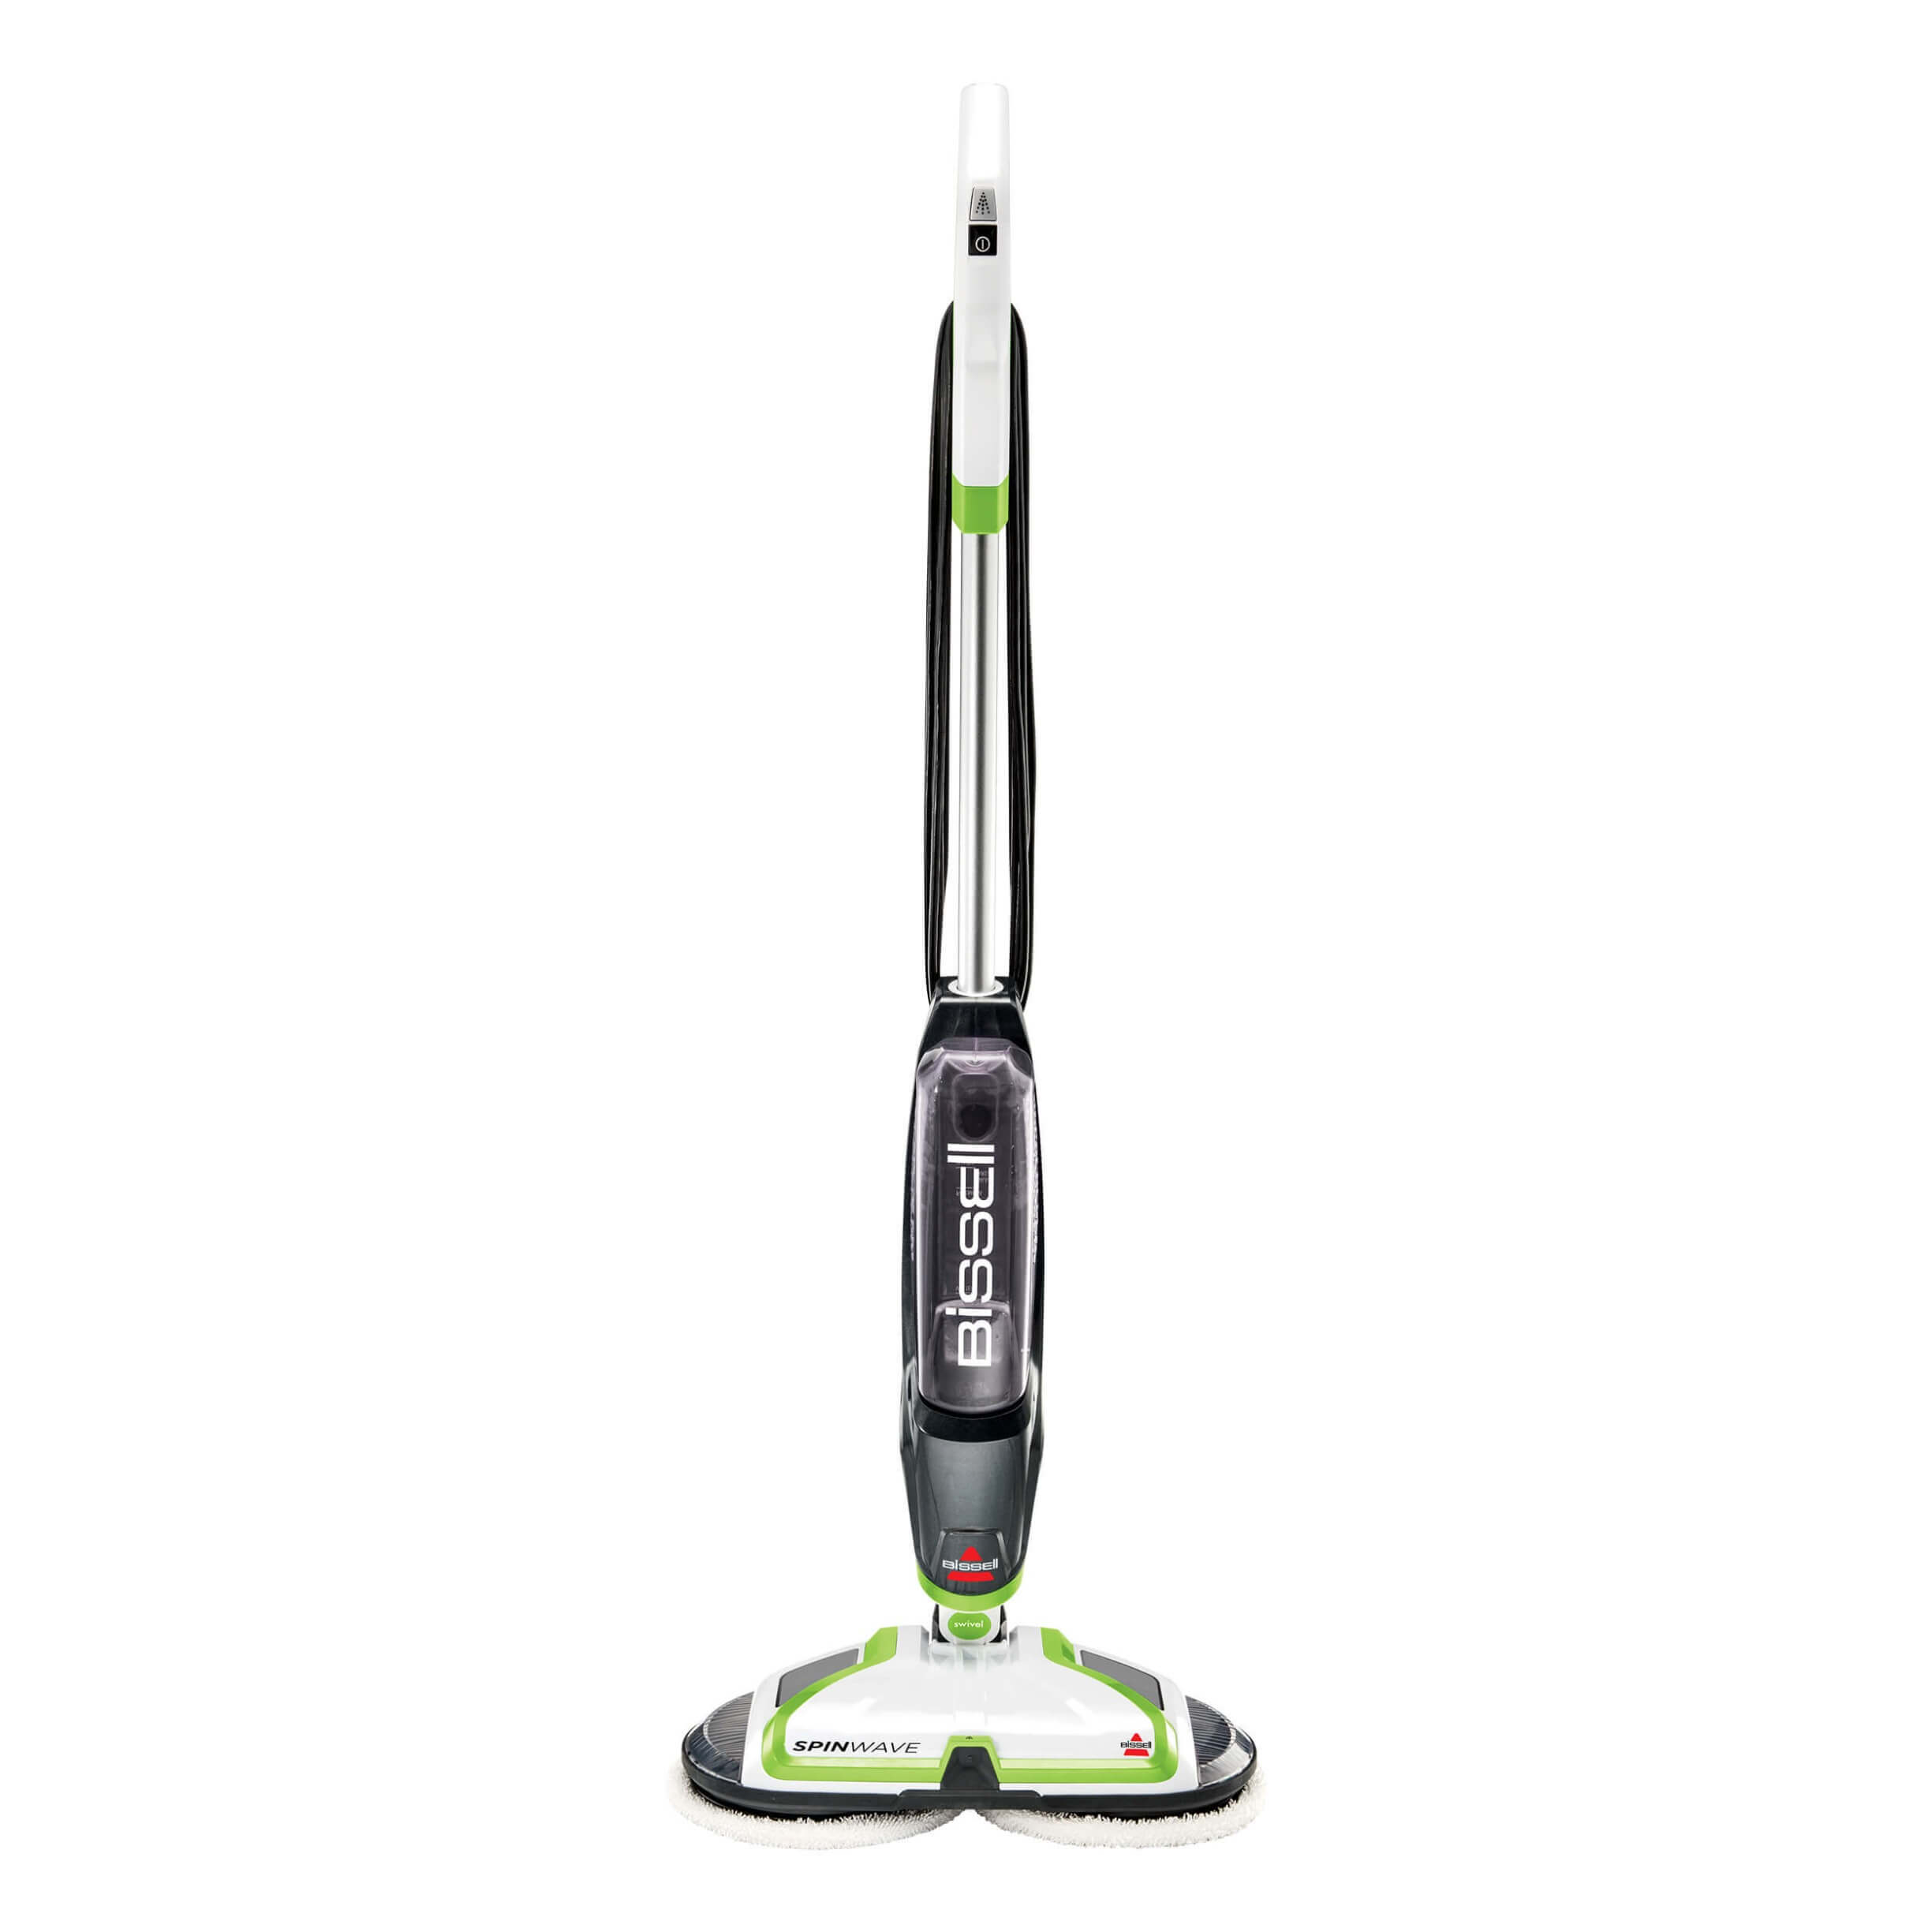 This Time-Saving Spray Mop Removes Dirt and Sticky Messes From All Floors